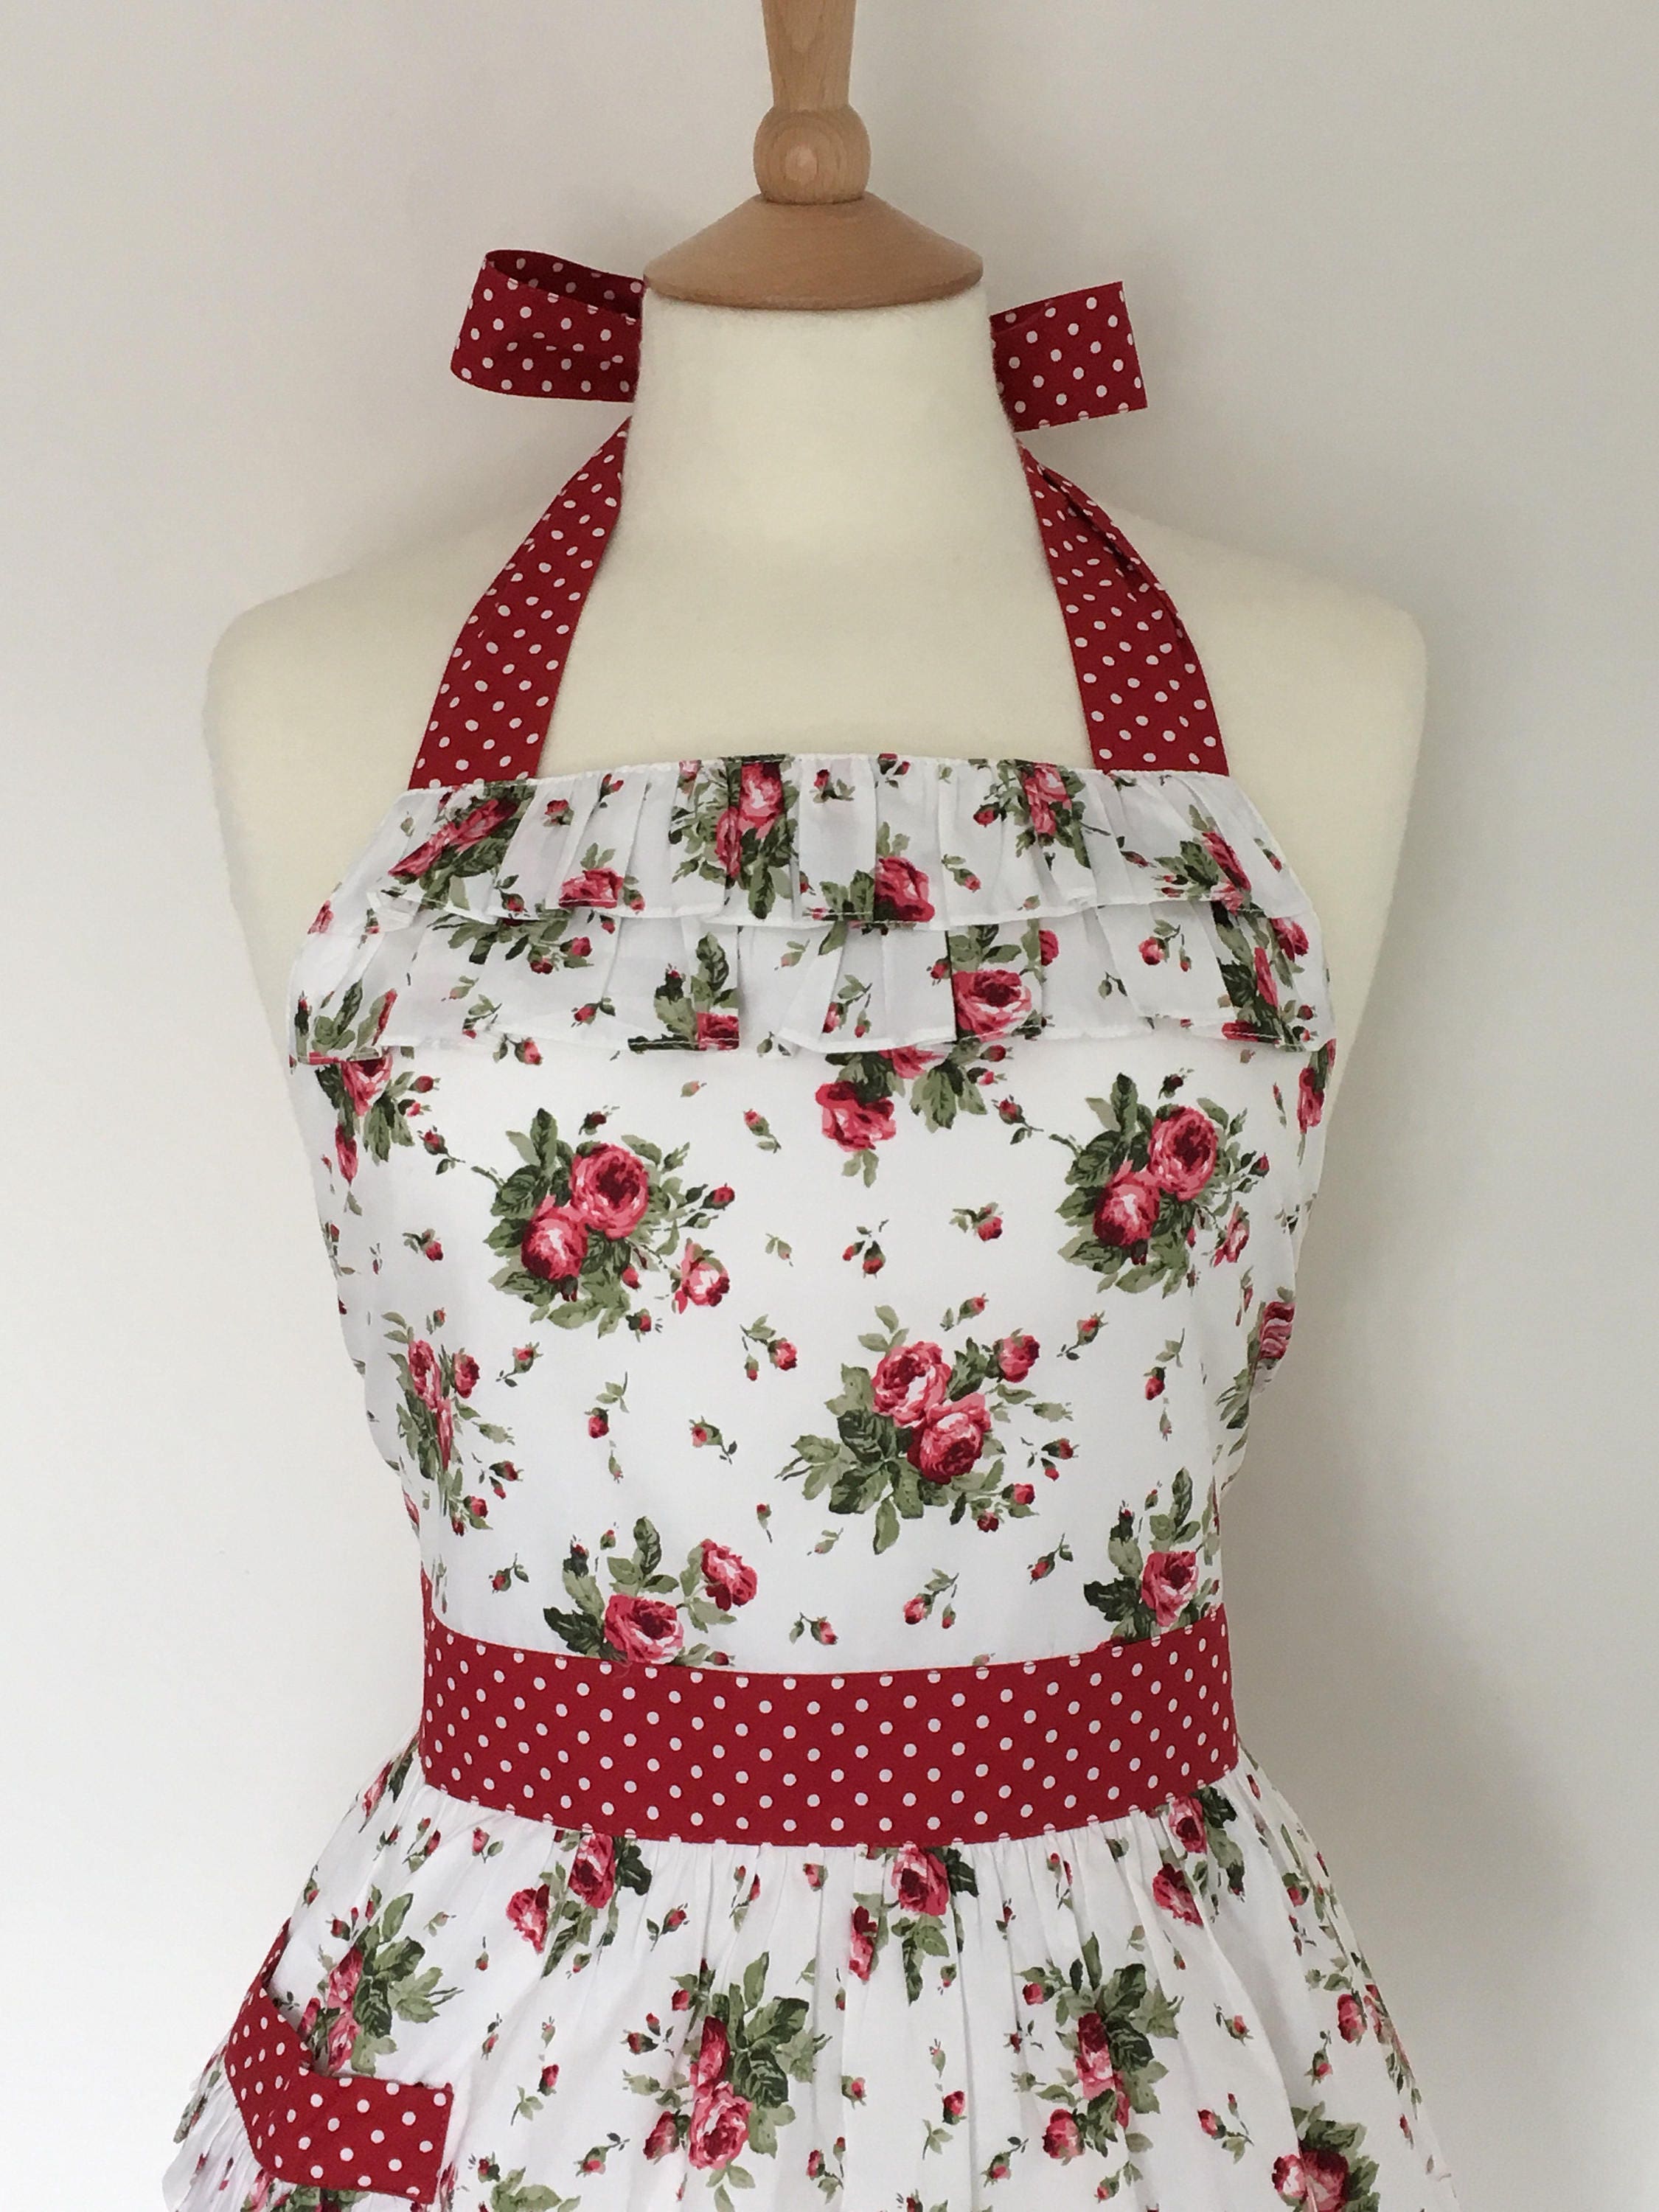 Retro Apron With Ruffles Vintage Red Floral Pattern S